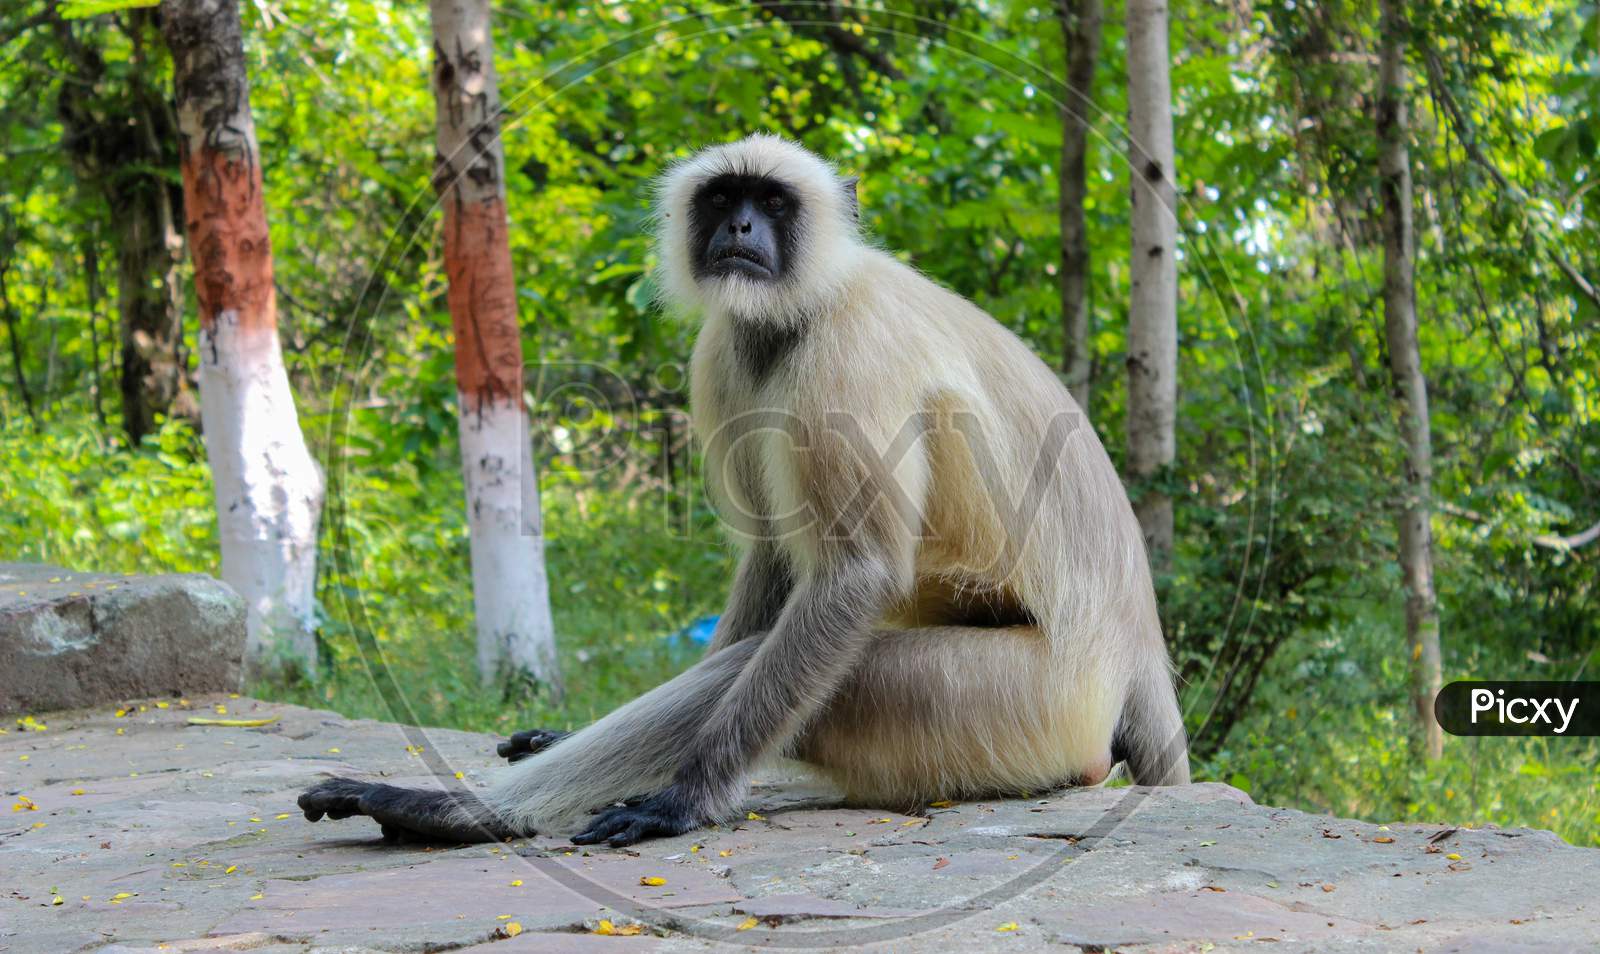 A black face indian monkey in Rajgir.